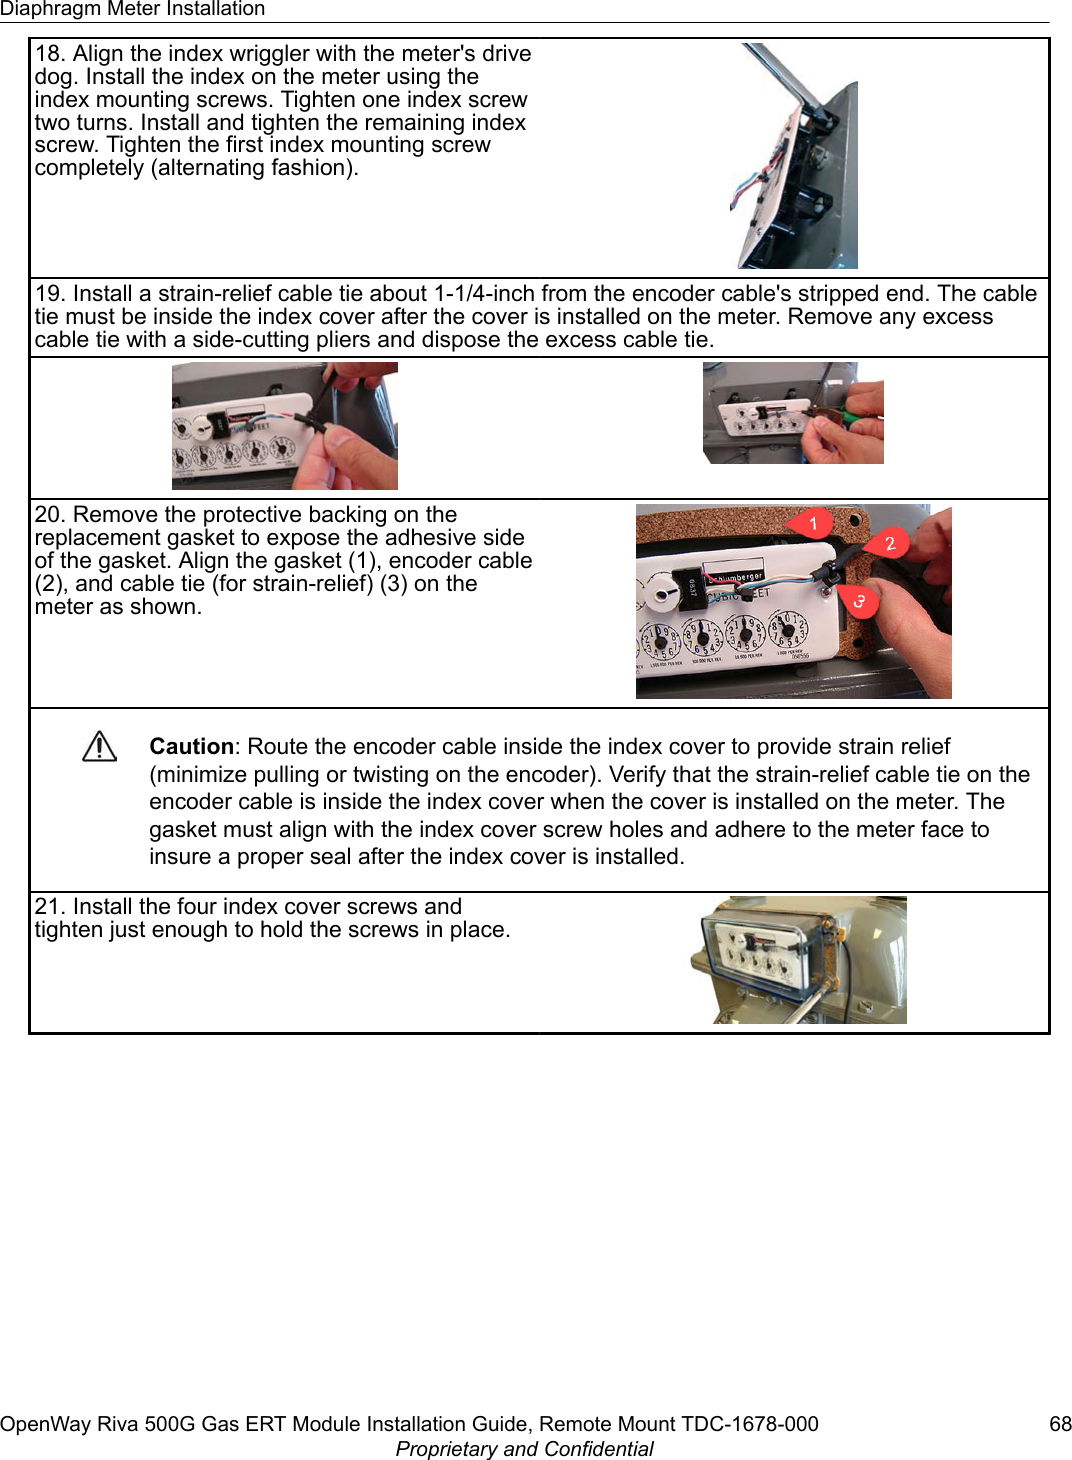 18. Align the index wriggler with the meter&apos;s drivedog. Install the index on the meter using theindex mounting screws. Tighten one index screwtwo turns. Install and tighten the remaining indexscrew. Tighten the first index mounting screwcompletely (alternating fashion).19. Install a strain-relief cable tie about 1-1/4-inch from the encoder cable&apos;s stripped end. The cabletie must be inside the index cover after the cover is installed on the meter. Remove any excesscable tie with a side-cutting pliers and dispose the excess cable tie.20. Remove the protective backing on thereplacement gasket to expose the adhesive sideof the gasket. Align the gasket (1), encoder cable(2), and cable tie (for strain-relief) (3) on themeter as shown.Caution: Route the encoder cable inside the index cover to provide strain relief(minimize pulling or twisting on the encoder). Verify that the strain-relief cable tie on theencoder cable is inside the index cover when the cover is installed on the meter. Thegasket must align with the index cover screw holes and adhere to the meter face toinsure a proper seal after the index cover is installed.21. Install the four index cover screws andtighten just enough to hold the screws in place.Diaphragm Meter InstallationOpenWay Riva 500G Gas ERT Module Installation Guide, Remote Mount TDC-1678-000 68Proprietary and Confidential